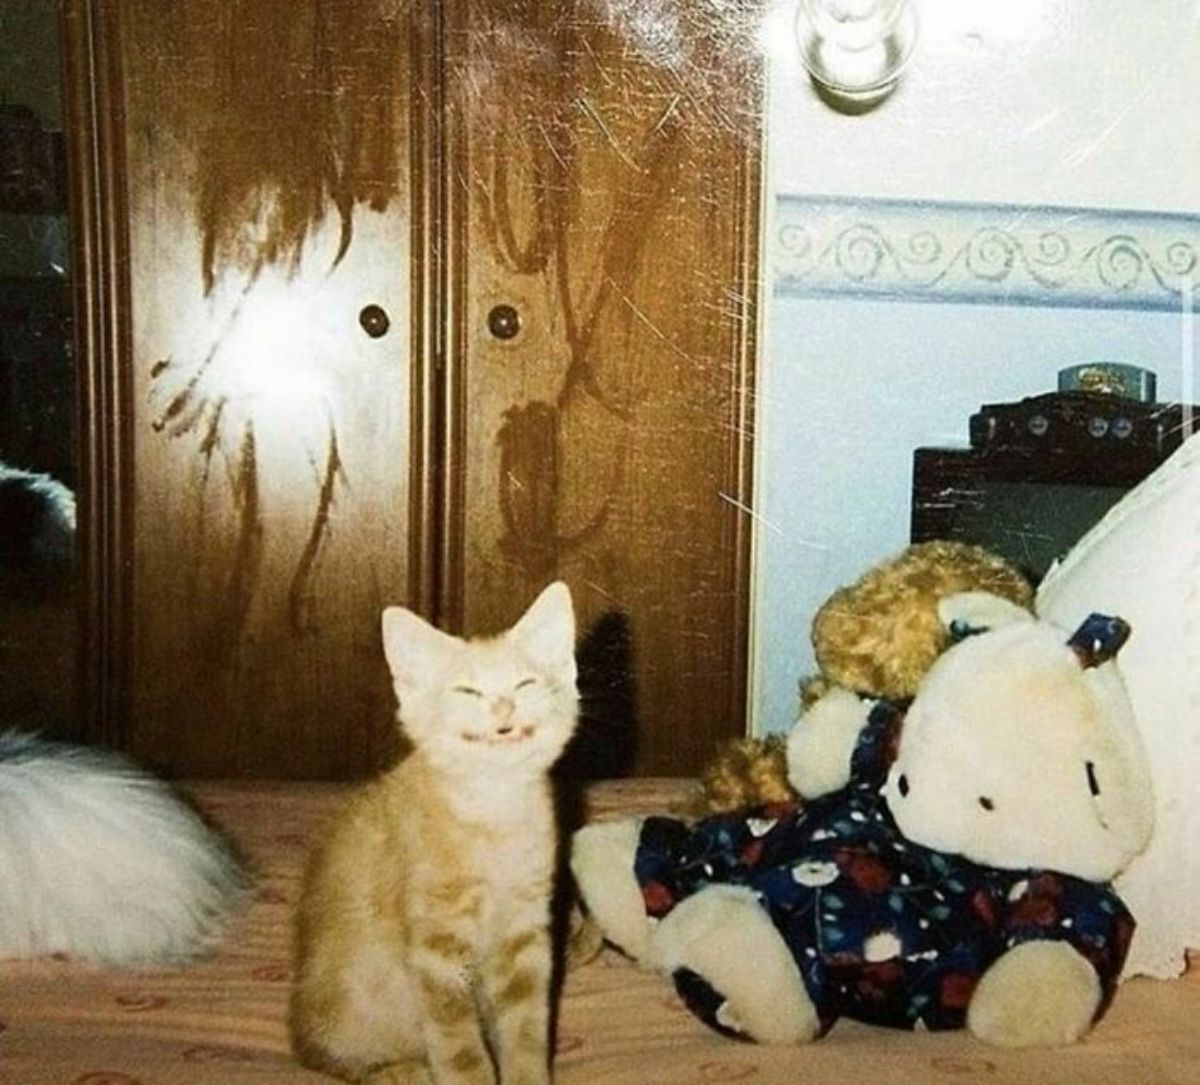 orange kitten sitting on a bed next to soft toys and grinning at the camera